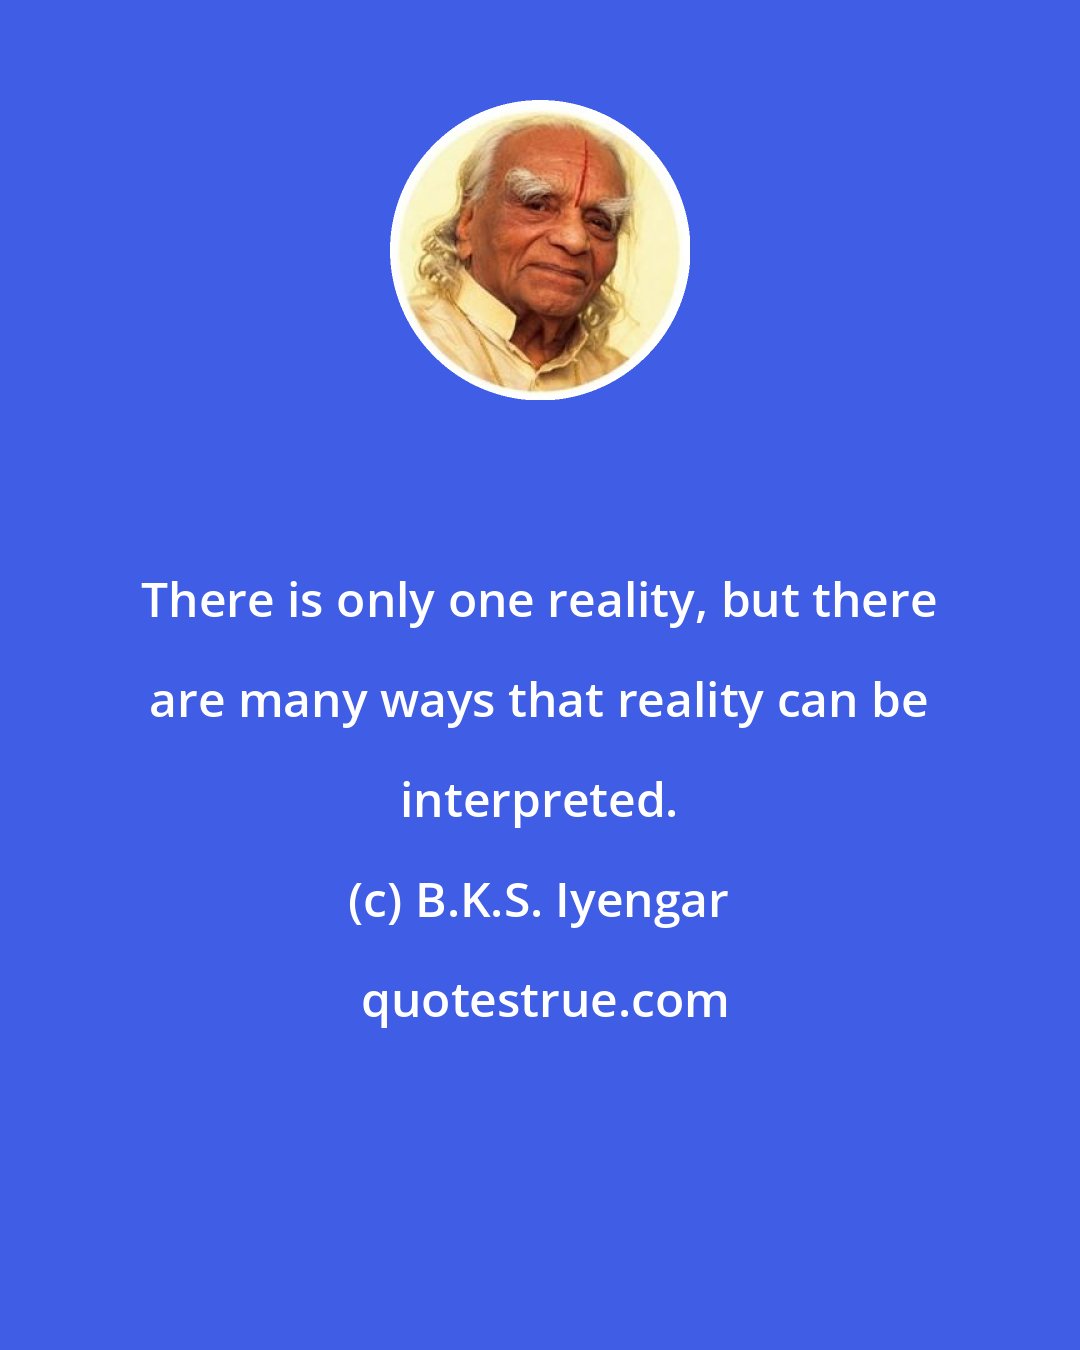 B.K.S. Iyengar: There is only one reality, but there are many ways that reality can be interpreted.